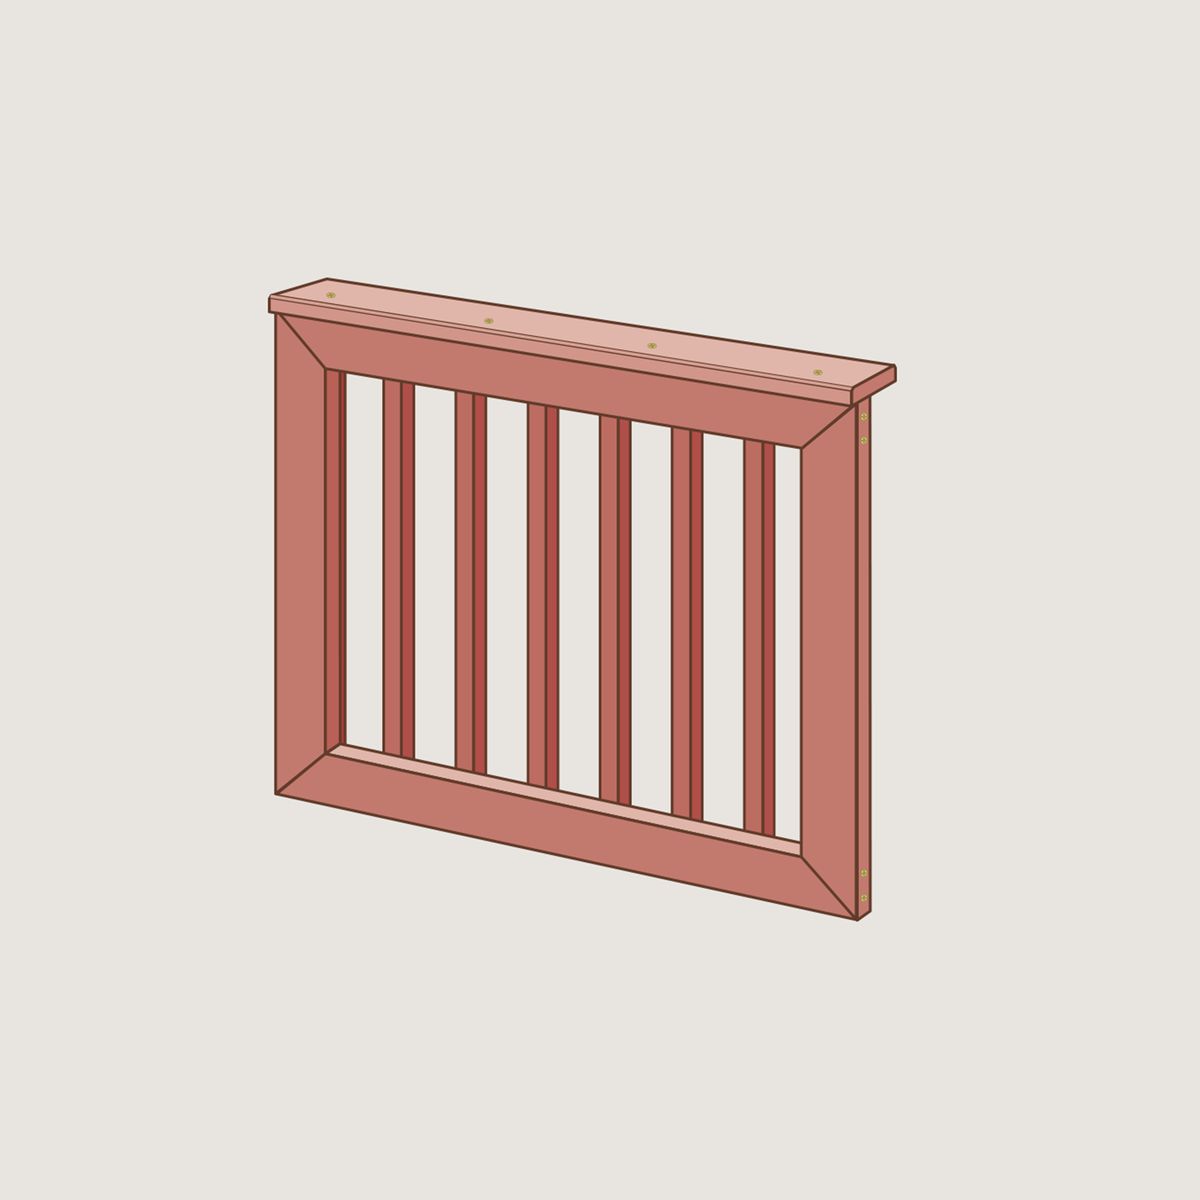 Gate with balusters illustration 